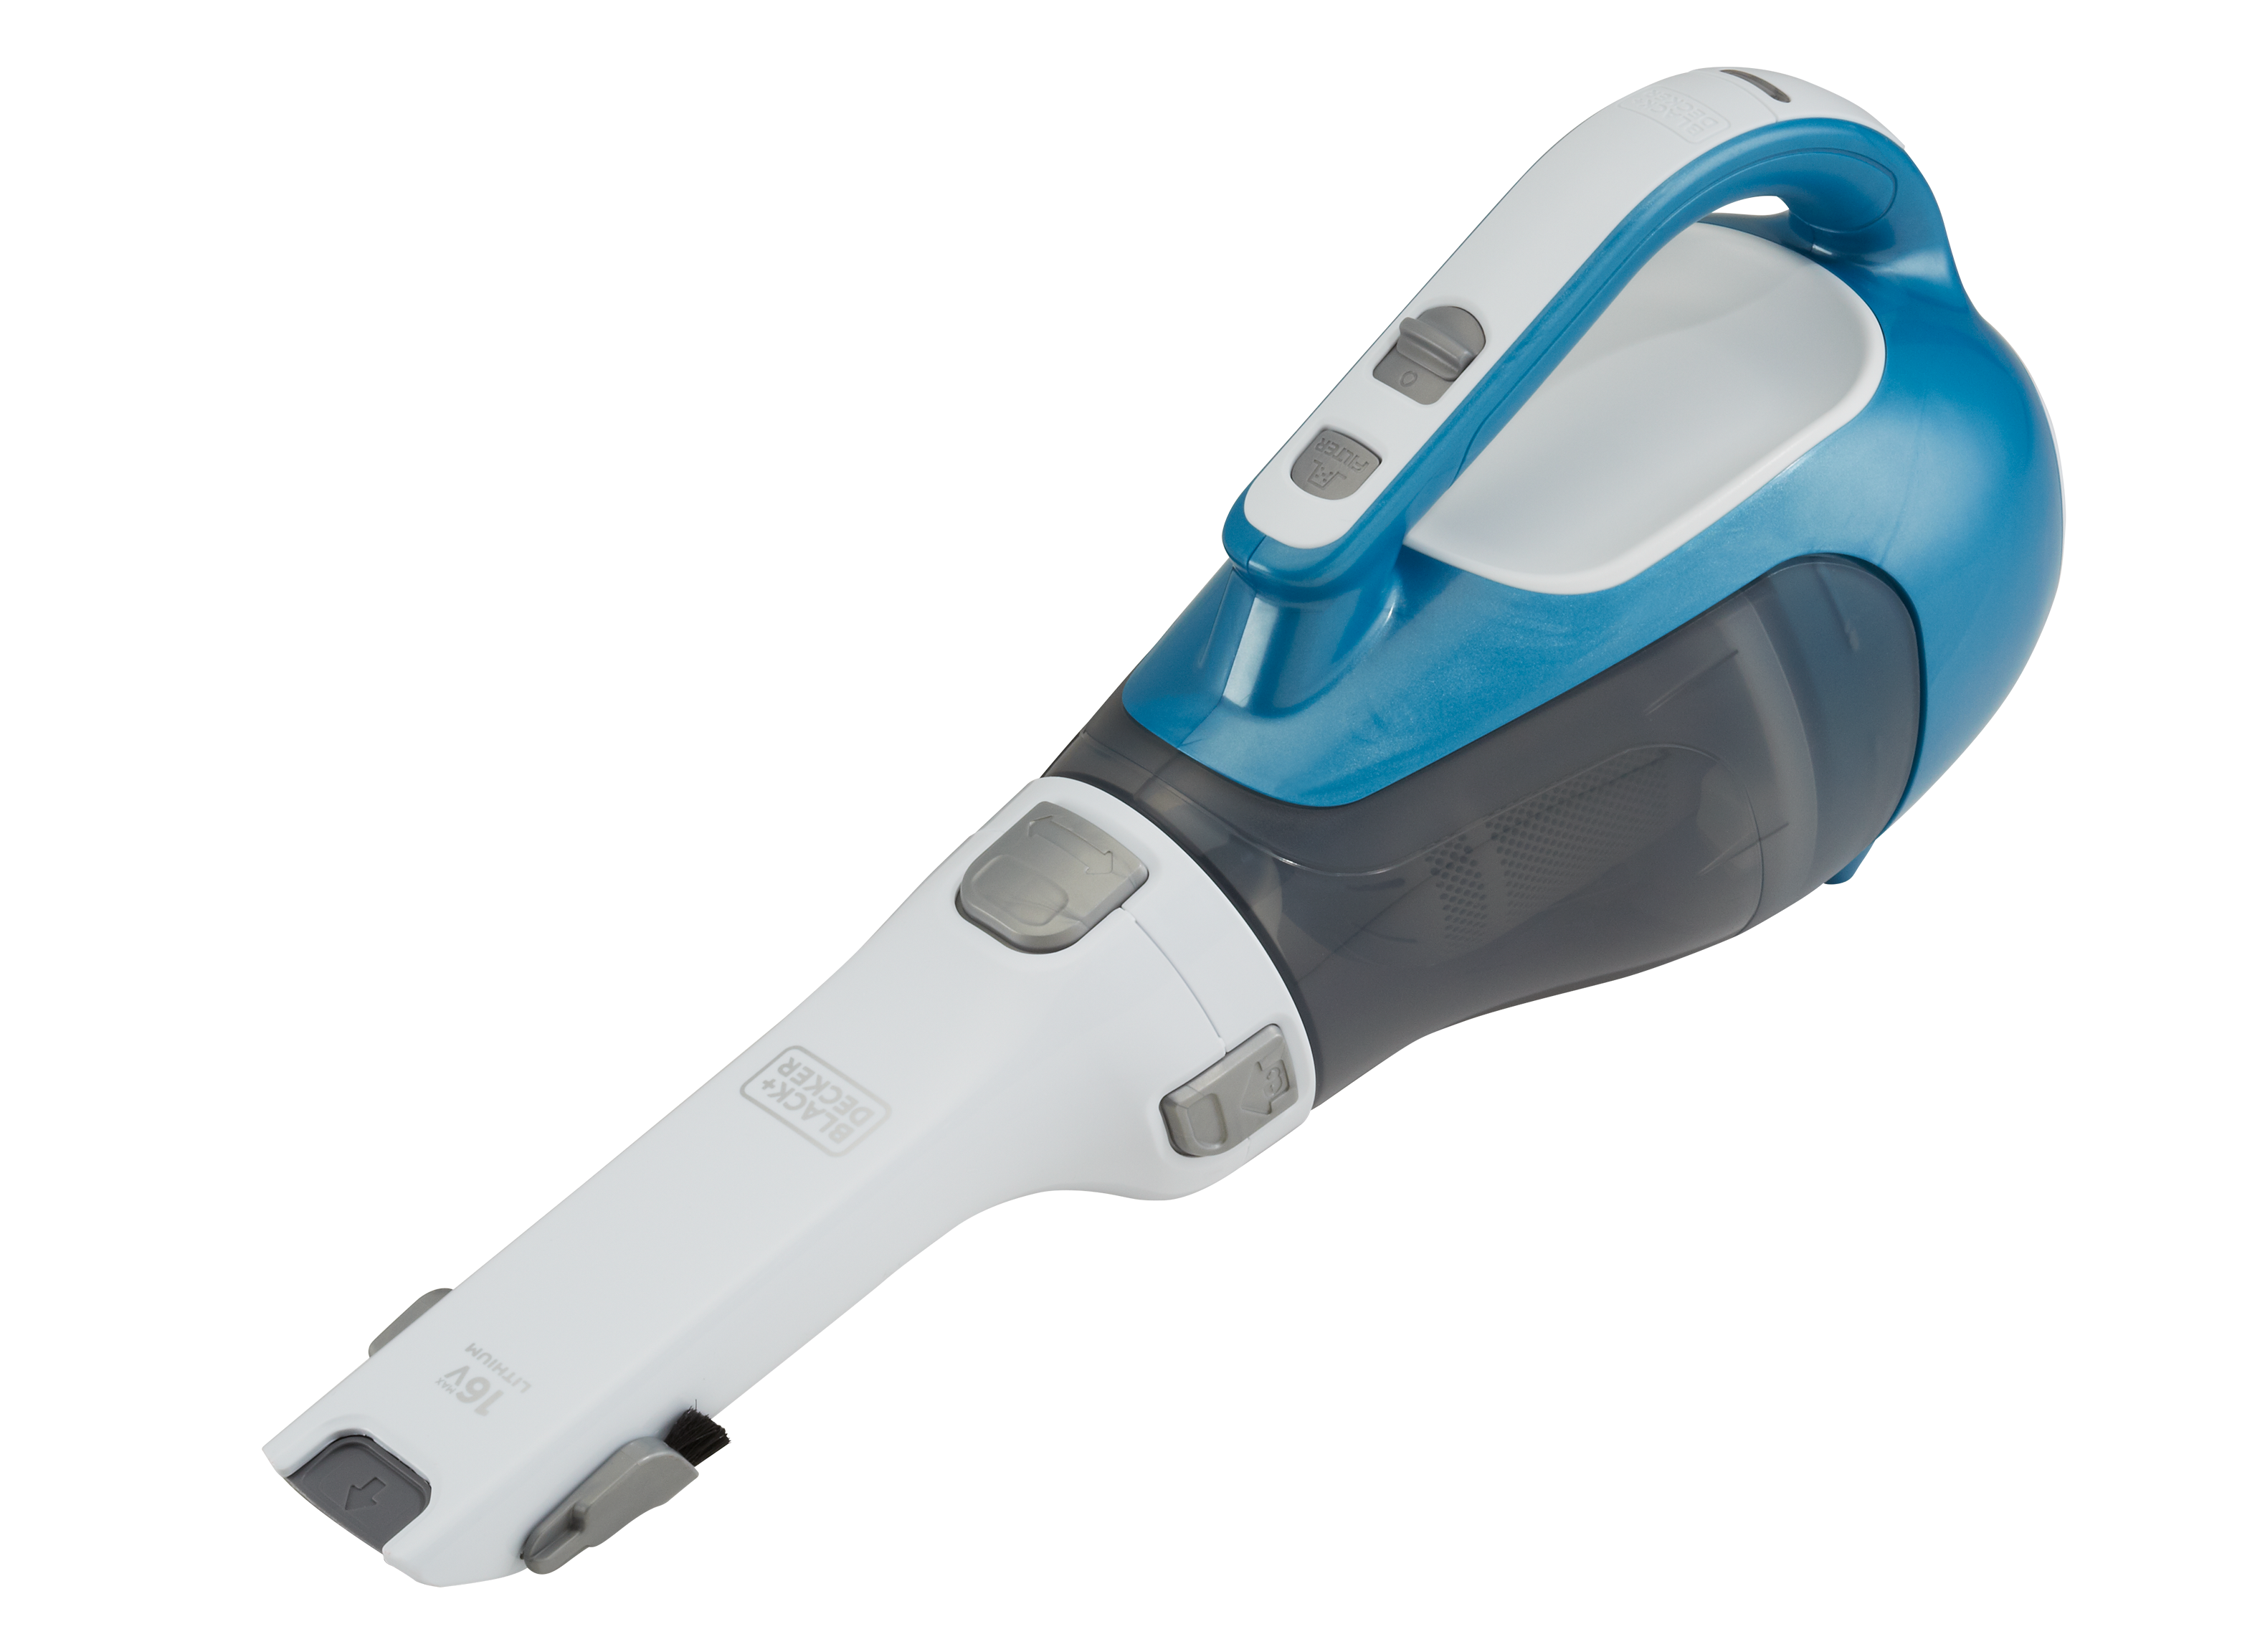 https://crdms.images.consumerreports.org/prod/products/cr/models/394620-handheld-vacuums-black-decker-dustbuster-chv1410l-59981.png